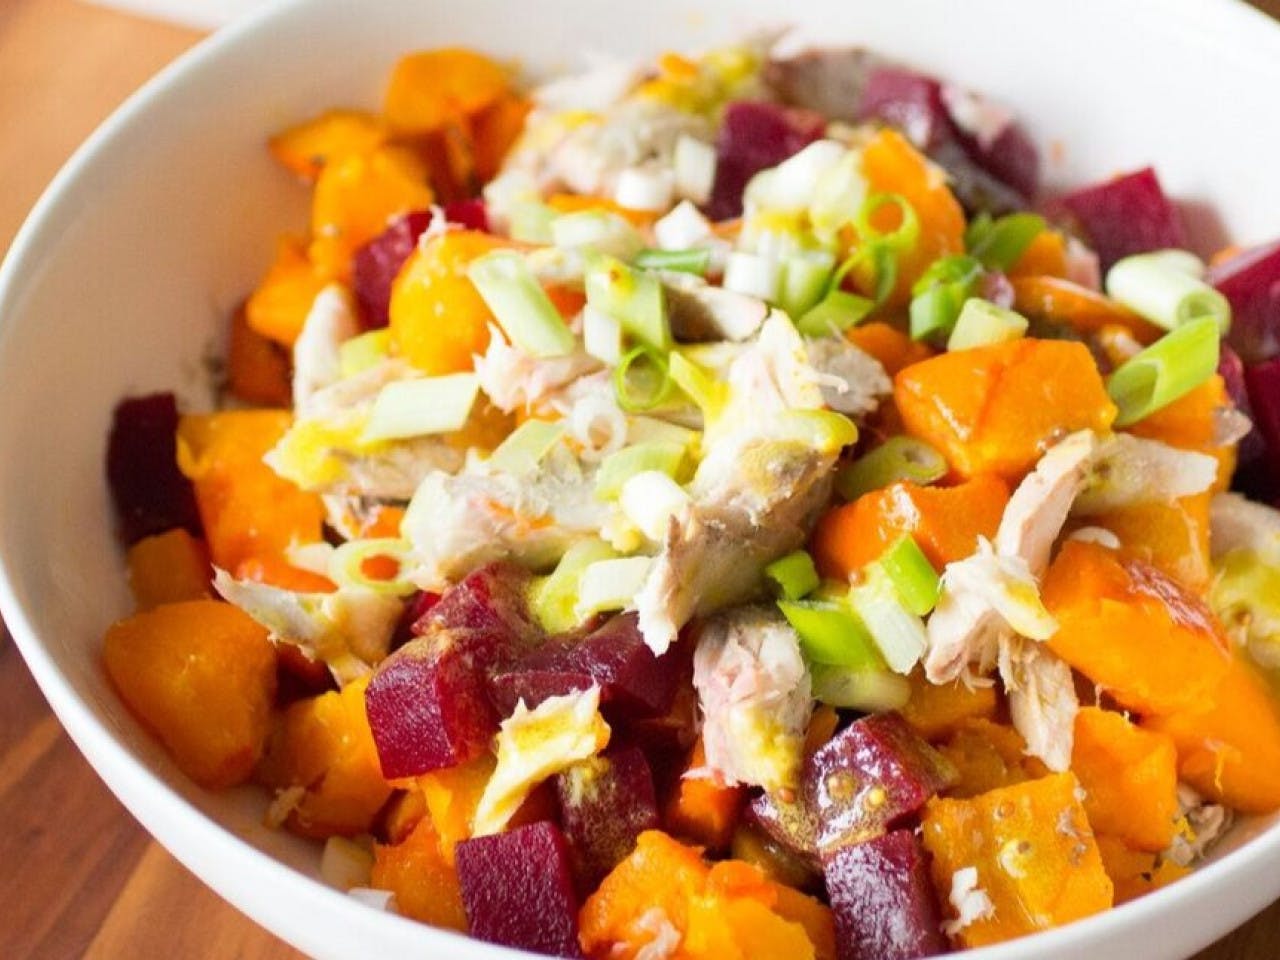 Meal salad with beetroot and mackerel